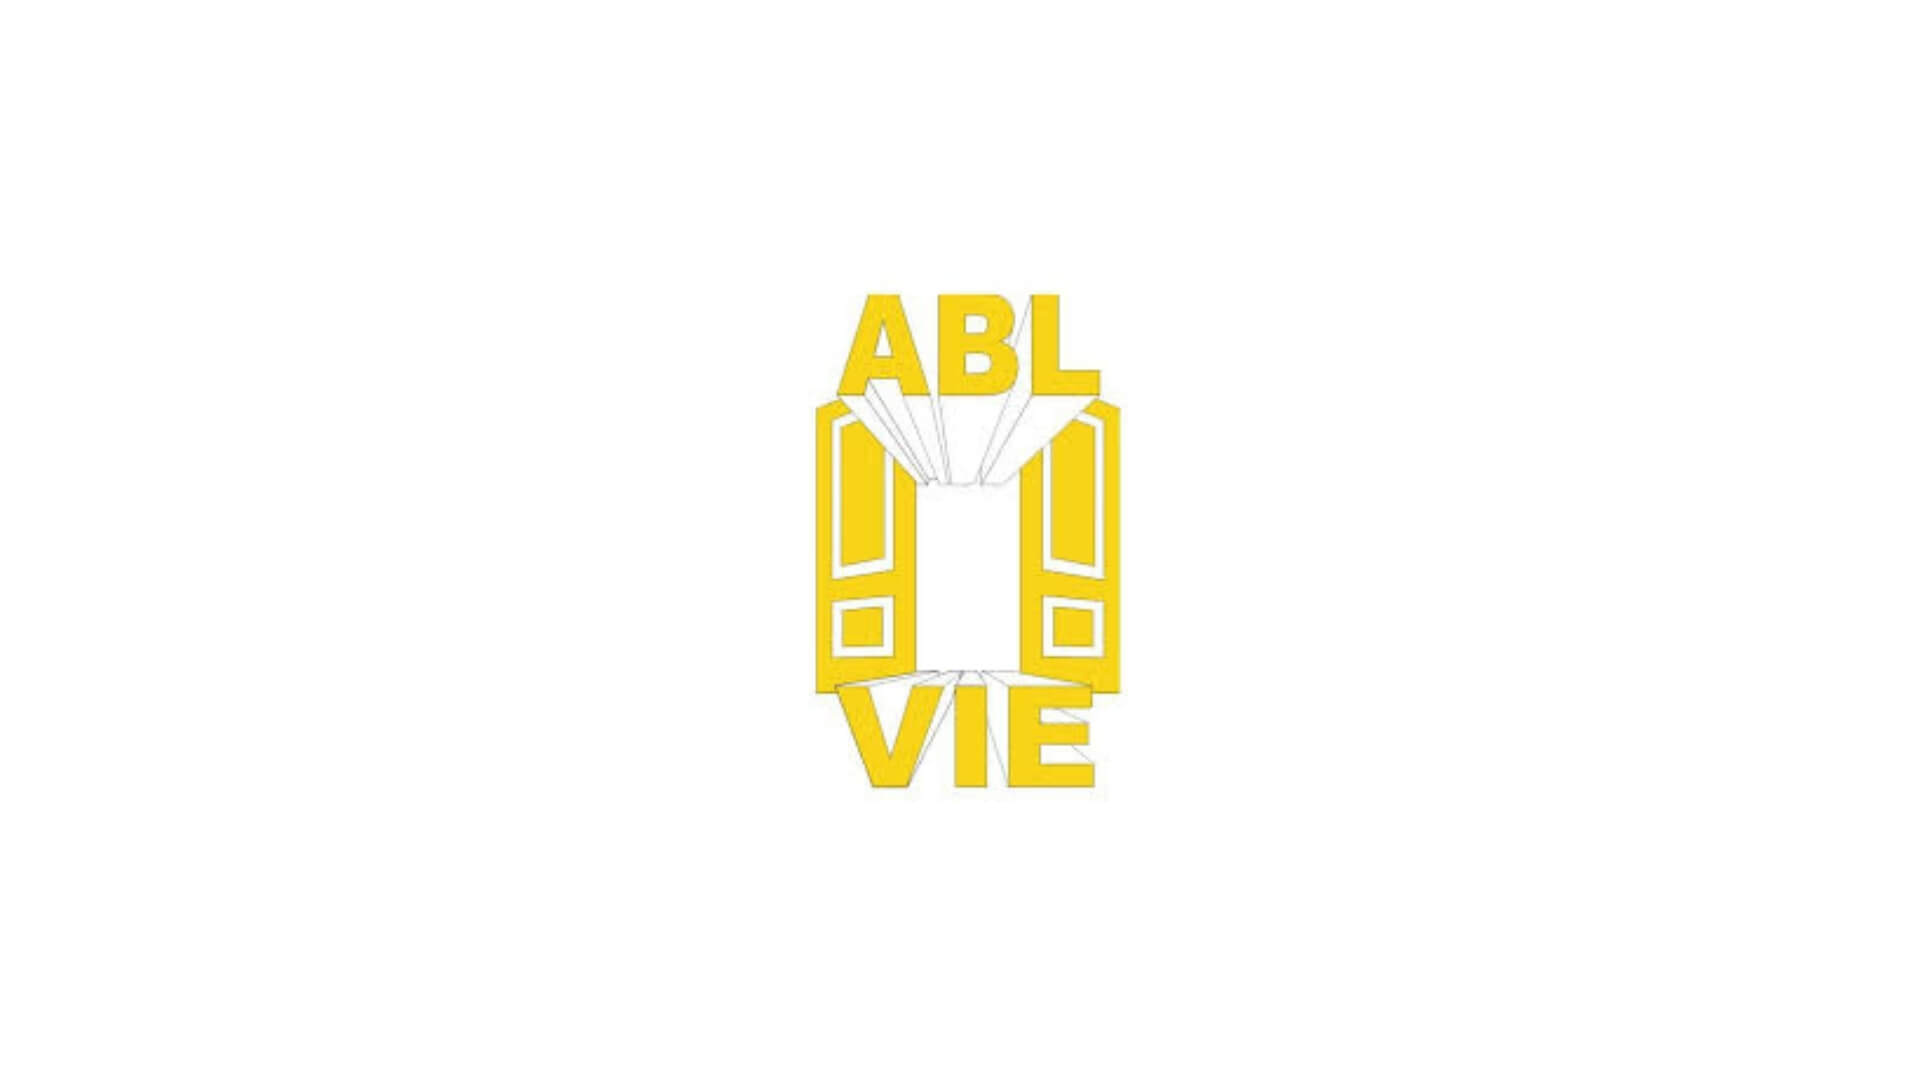 Timmins Care Yellow text forming the words "able" and "vie" arranged vertically around a graphic resembling an open book, all against a white background. Cochrane District Social Services Administration Board